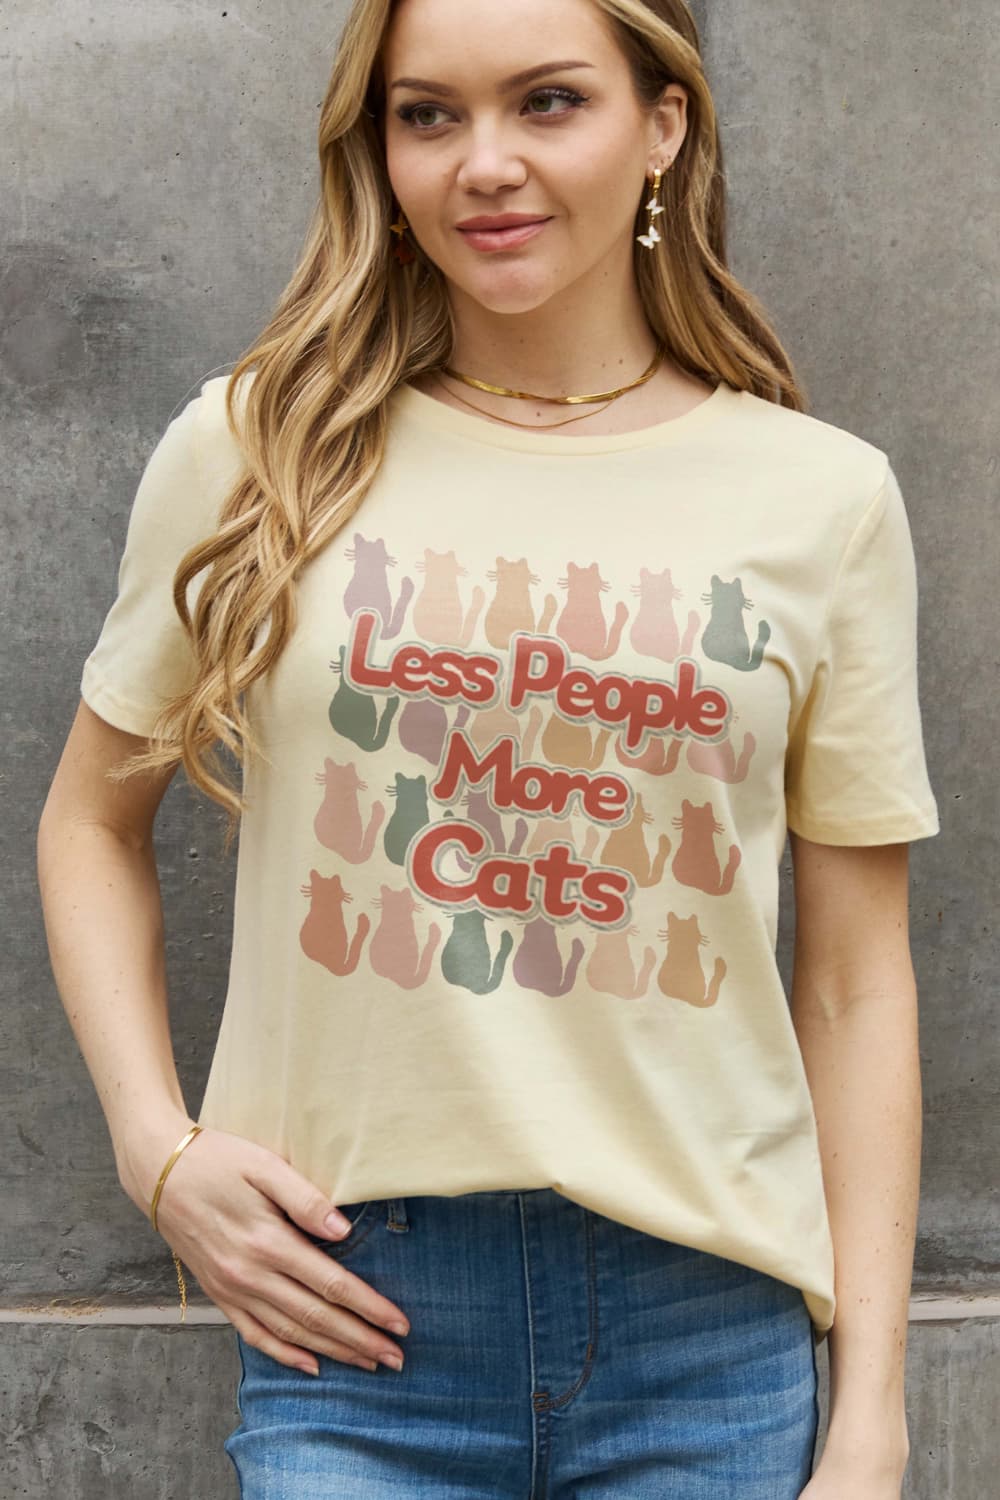 LESS PEOPLE MORE CATS Graphic Cotton Tee - T-Shirts - Shirts & Tops - 14 - 2024